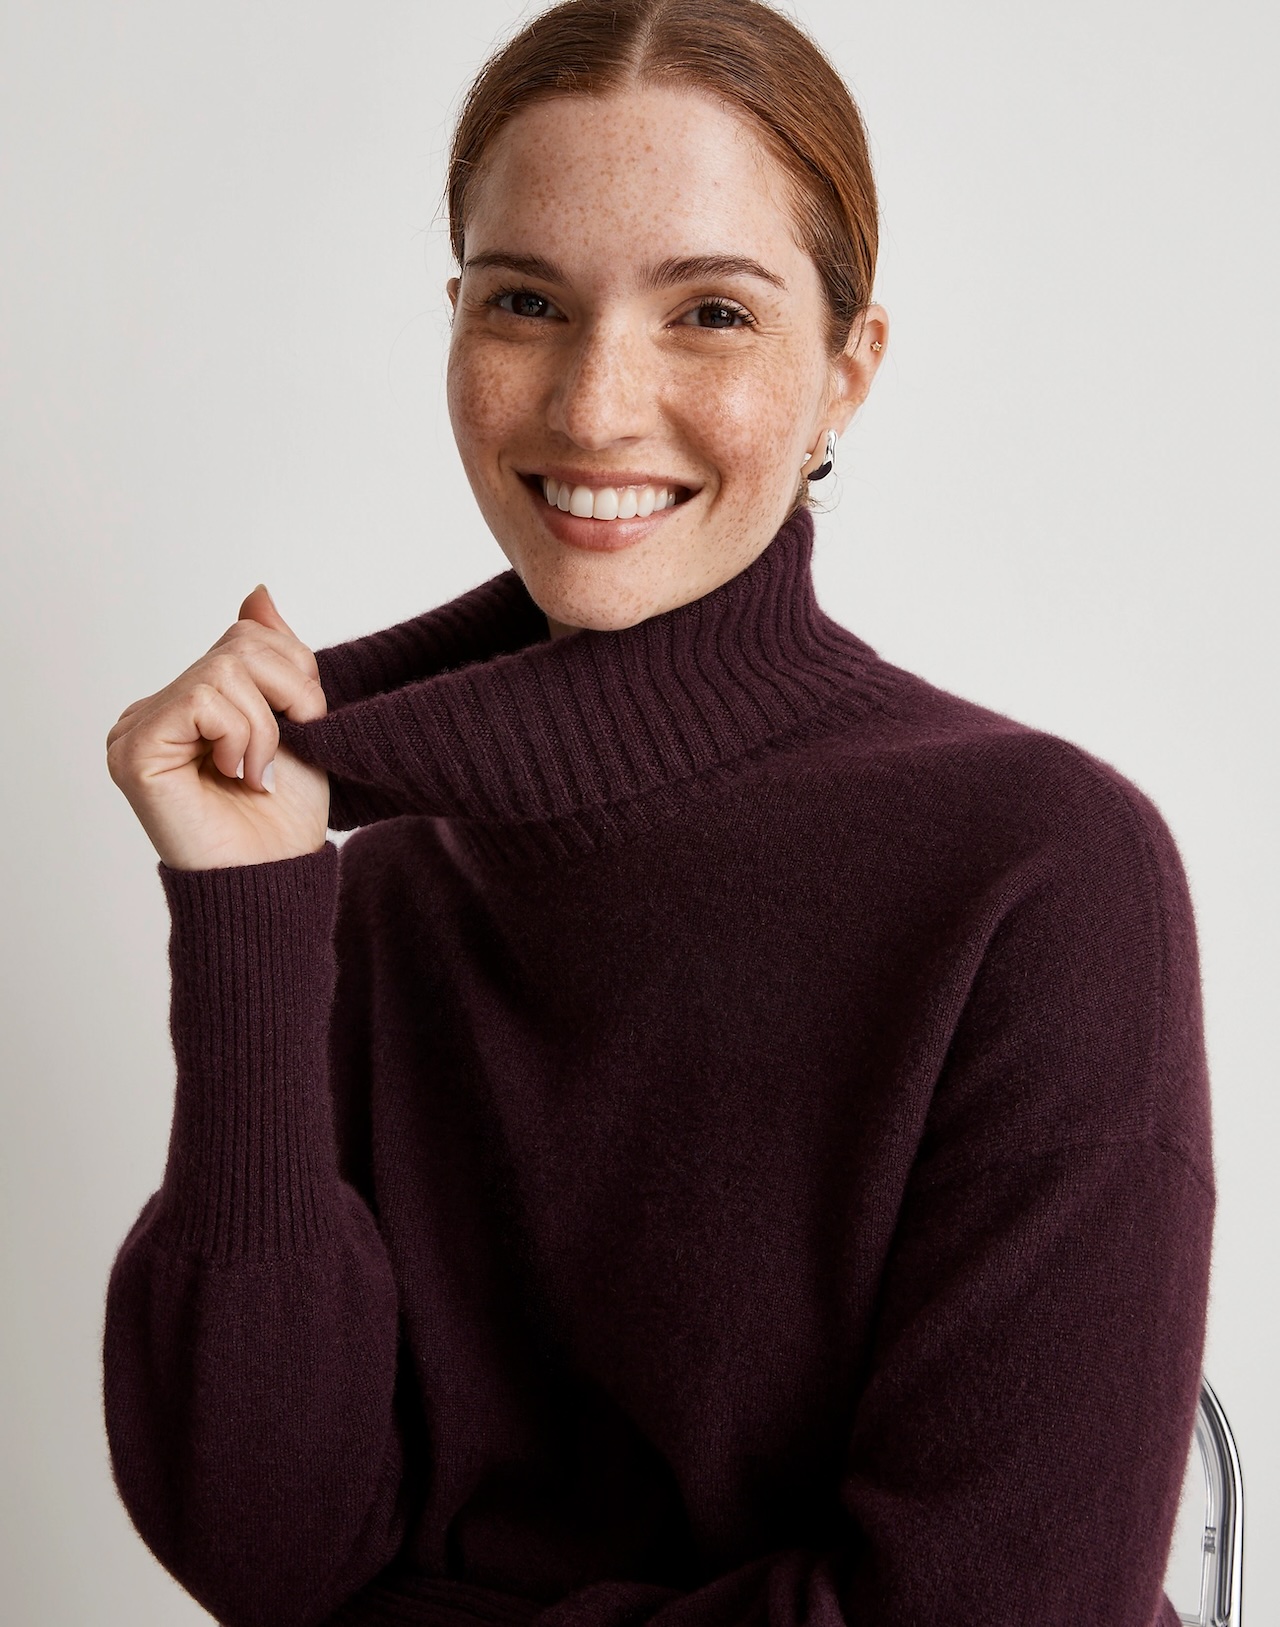 Winter Sweaters: Find Your Perfect Armocromia Knit